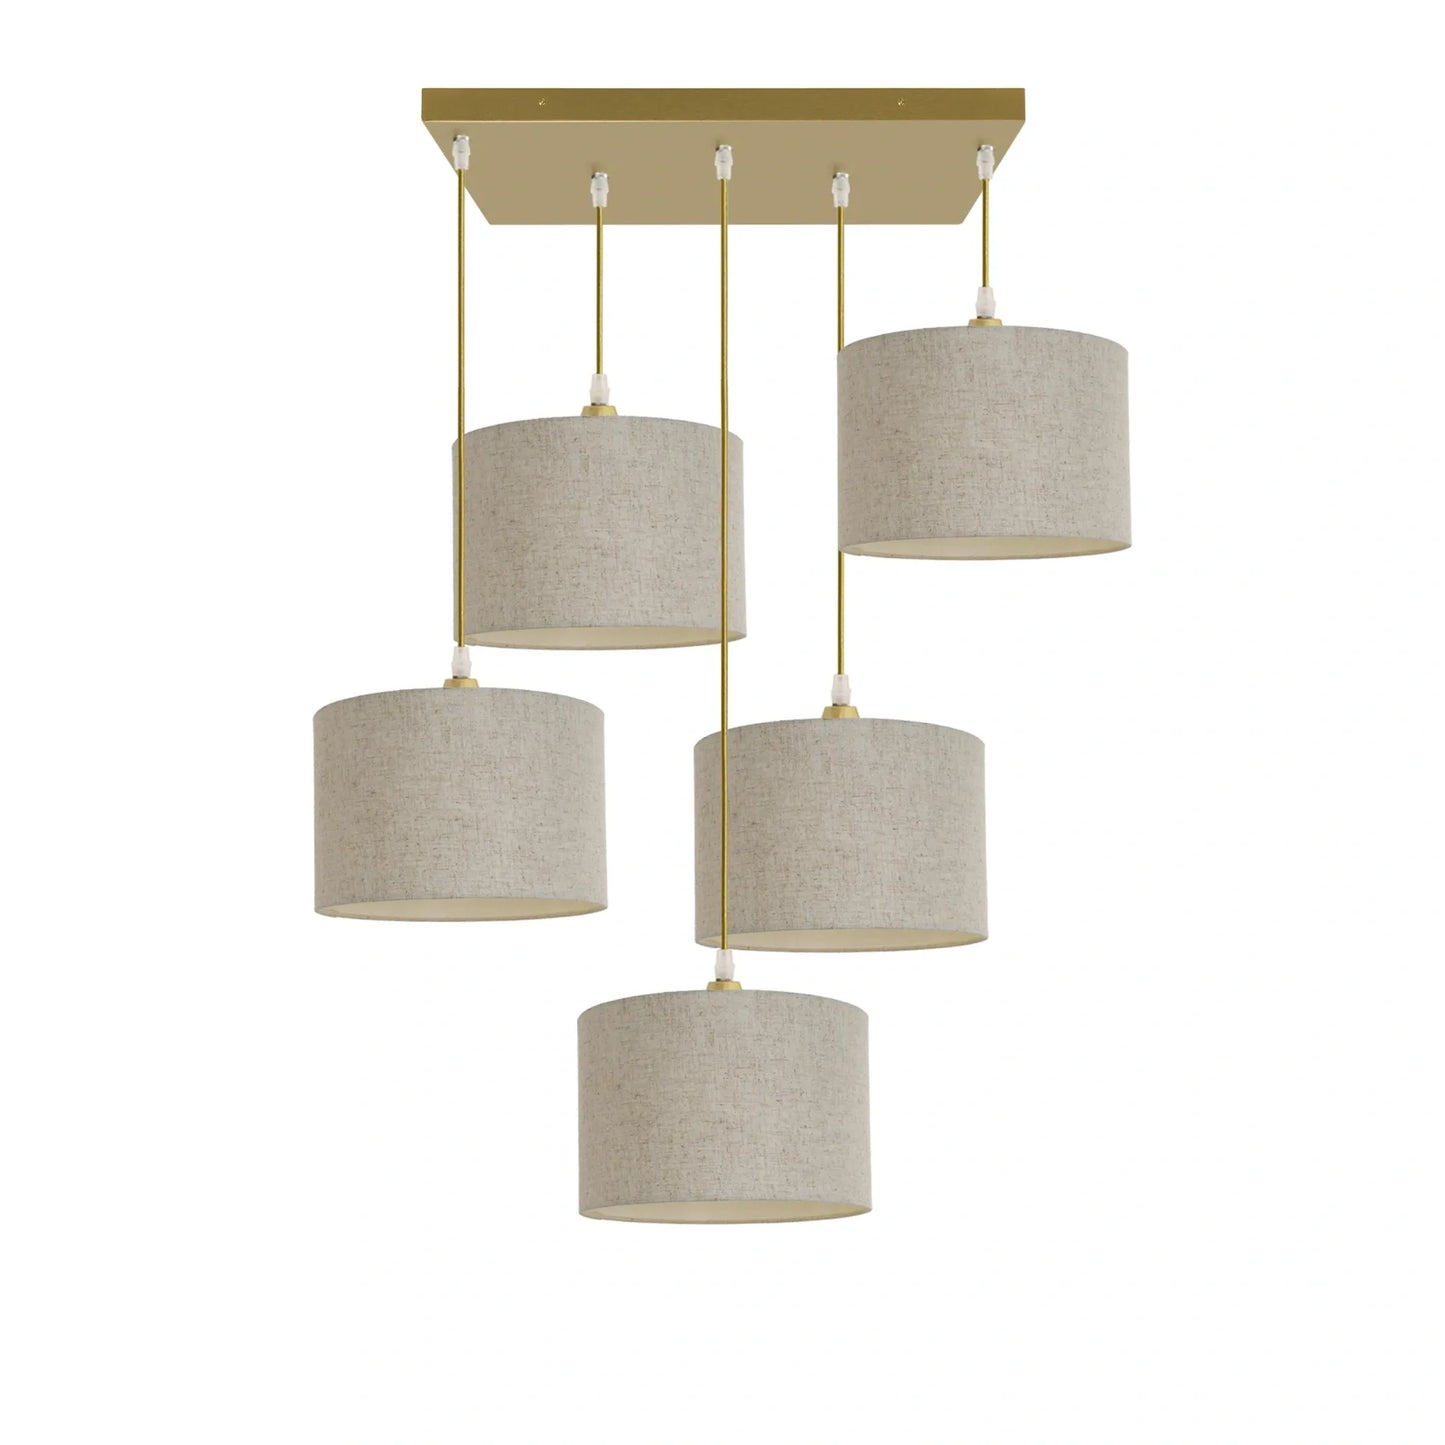 Murano 5 Light with woven hand made Fabric Shades